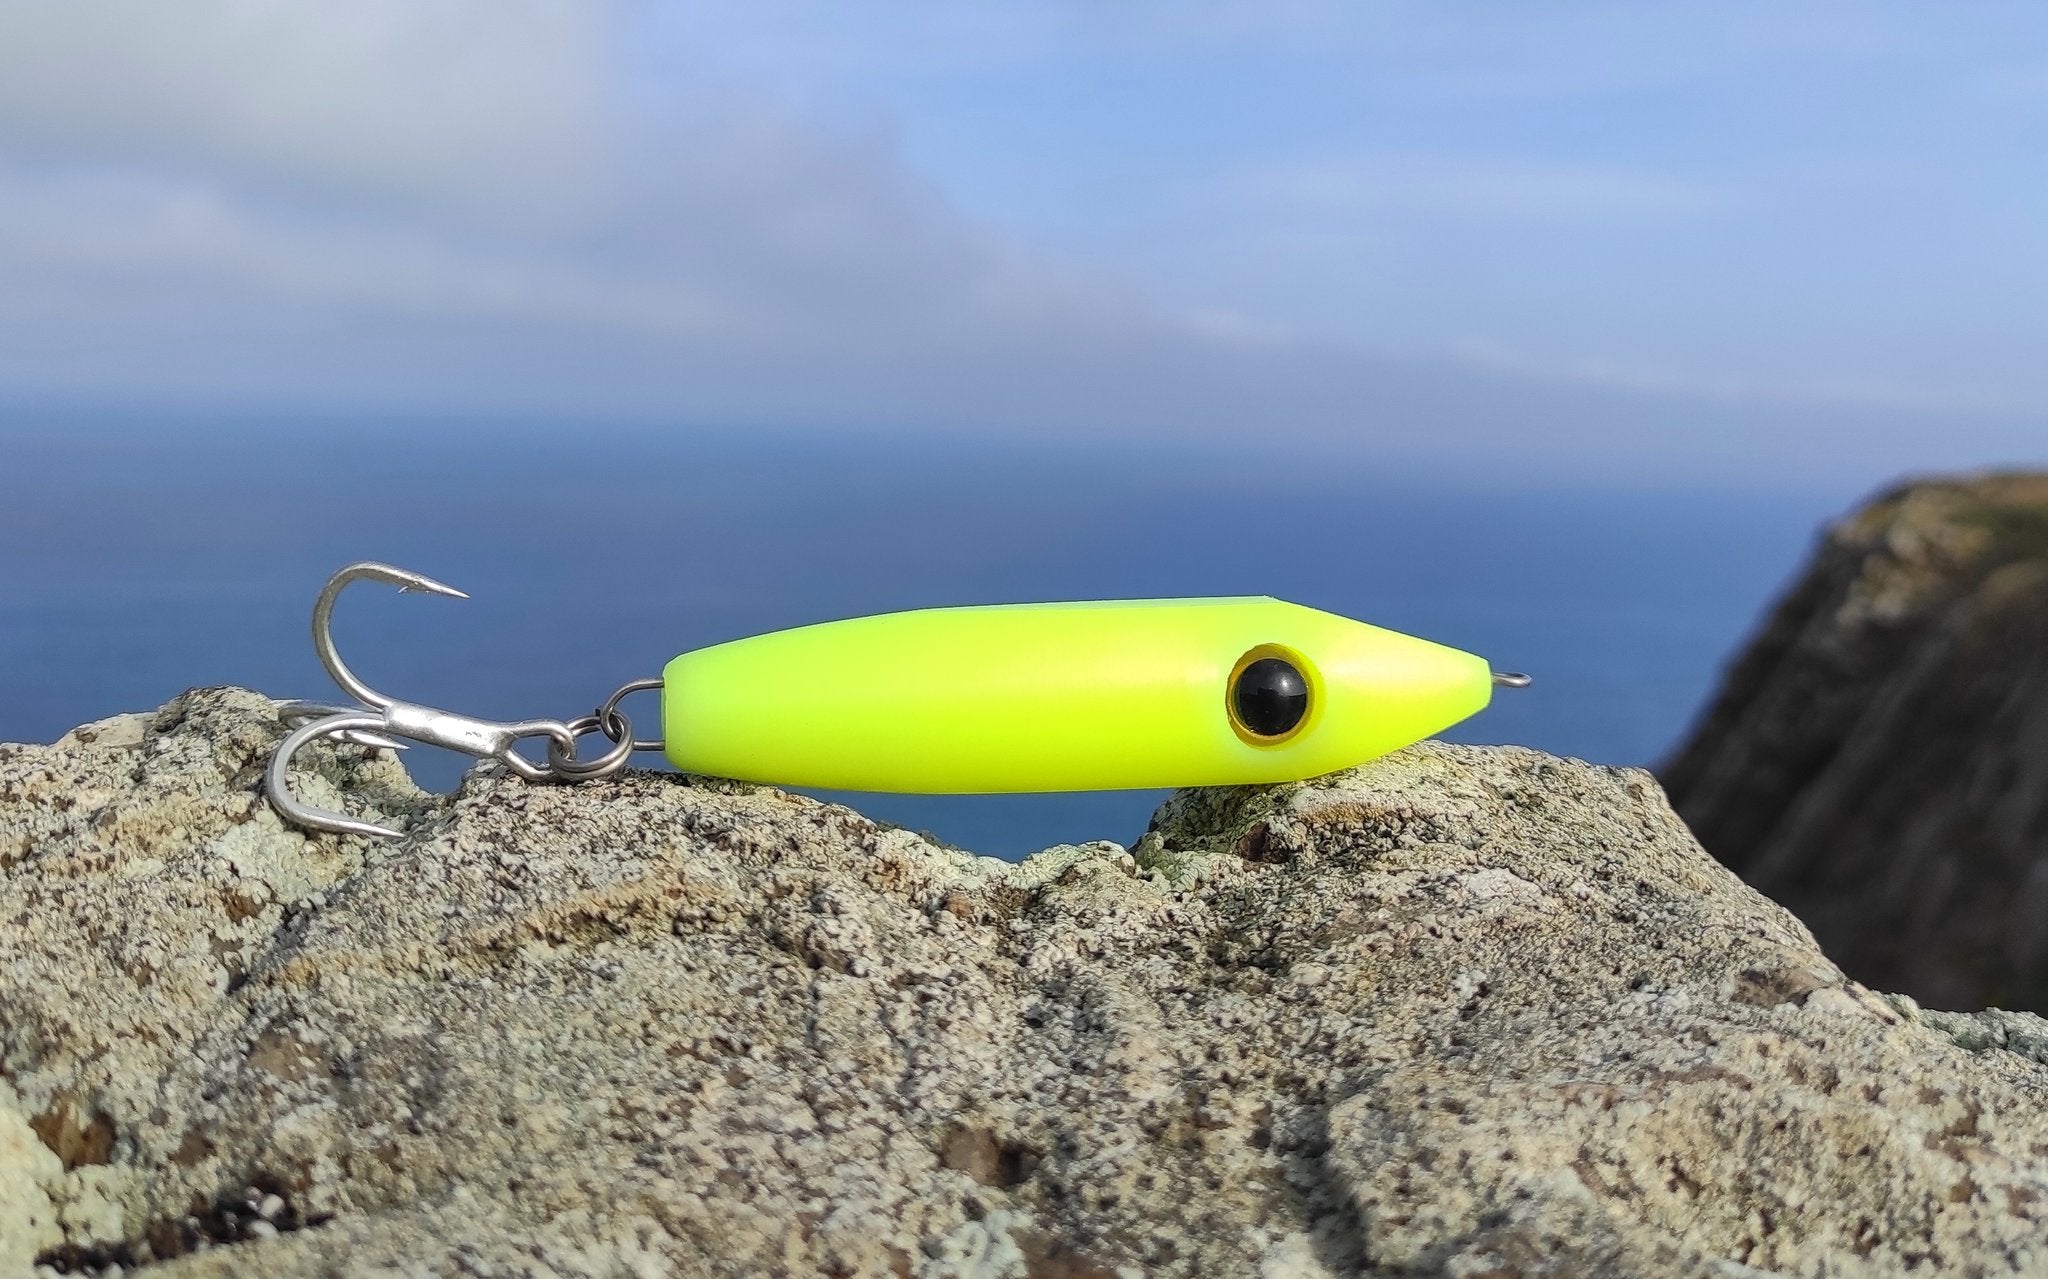 Samson Enticer Minnow Topwater Sub Fishing Lure High Visibility Yellow